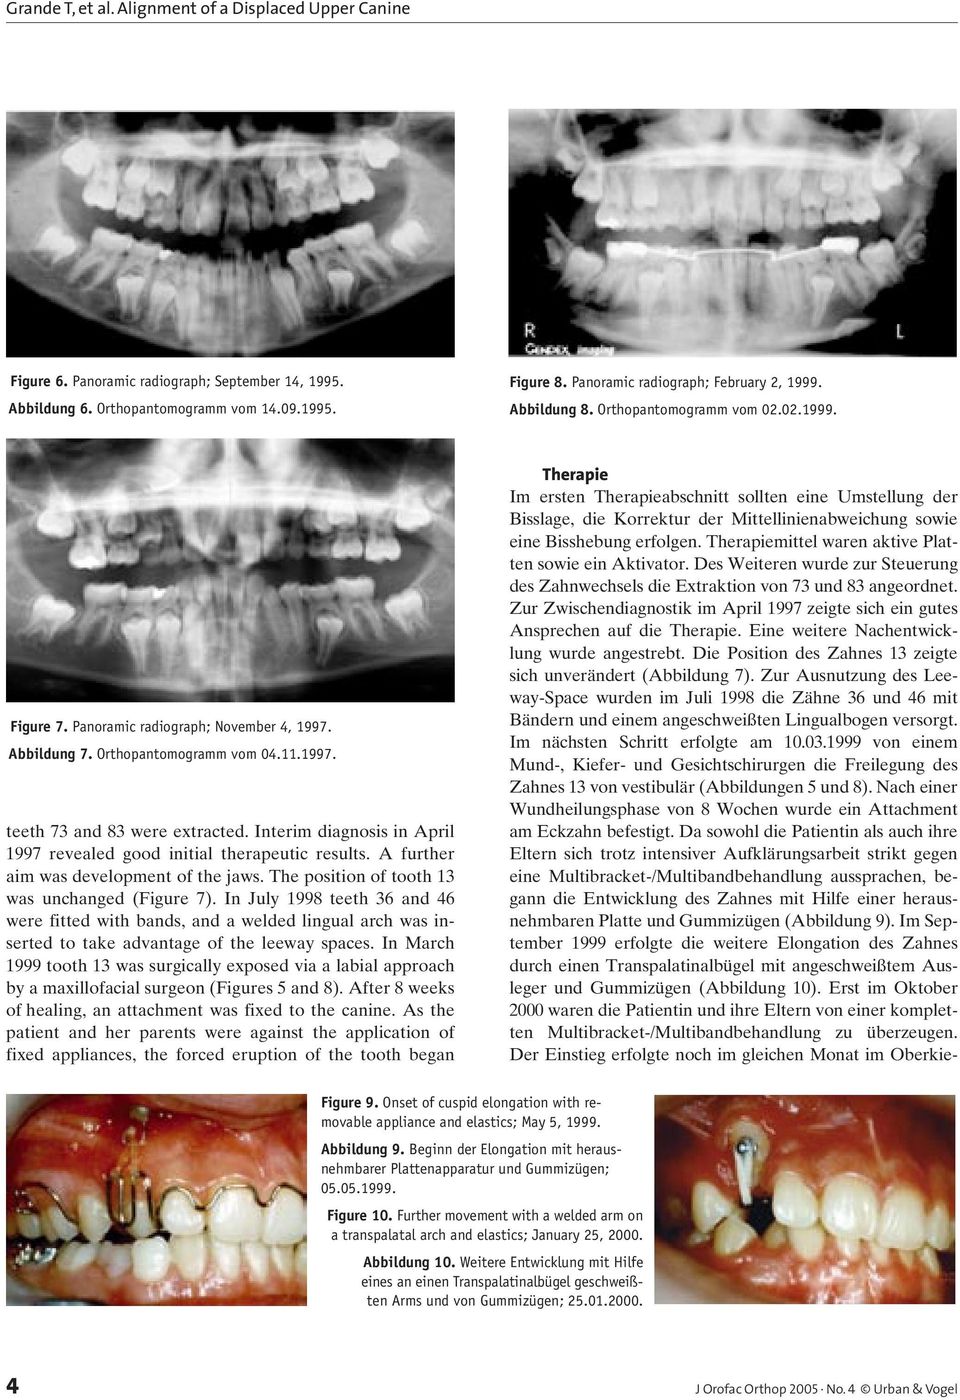 Interim diagnosis in April 1997 revealed good initial therapeutic results. A further aim was development of the jaws. The position of tooth 13 was unchanged (Figure 7).